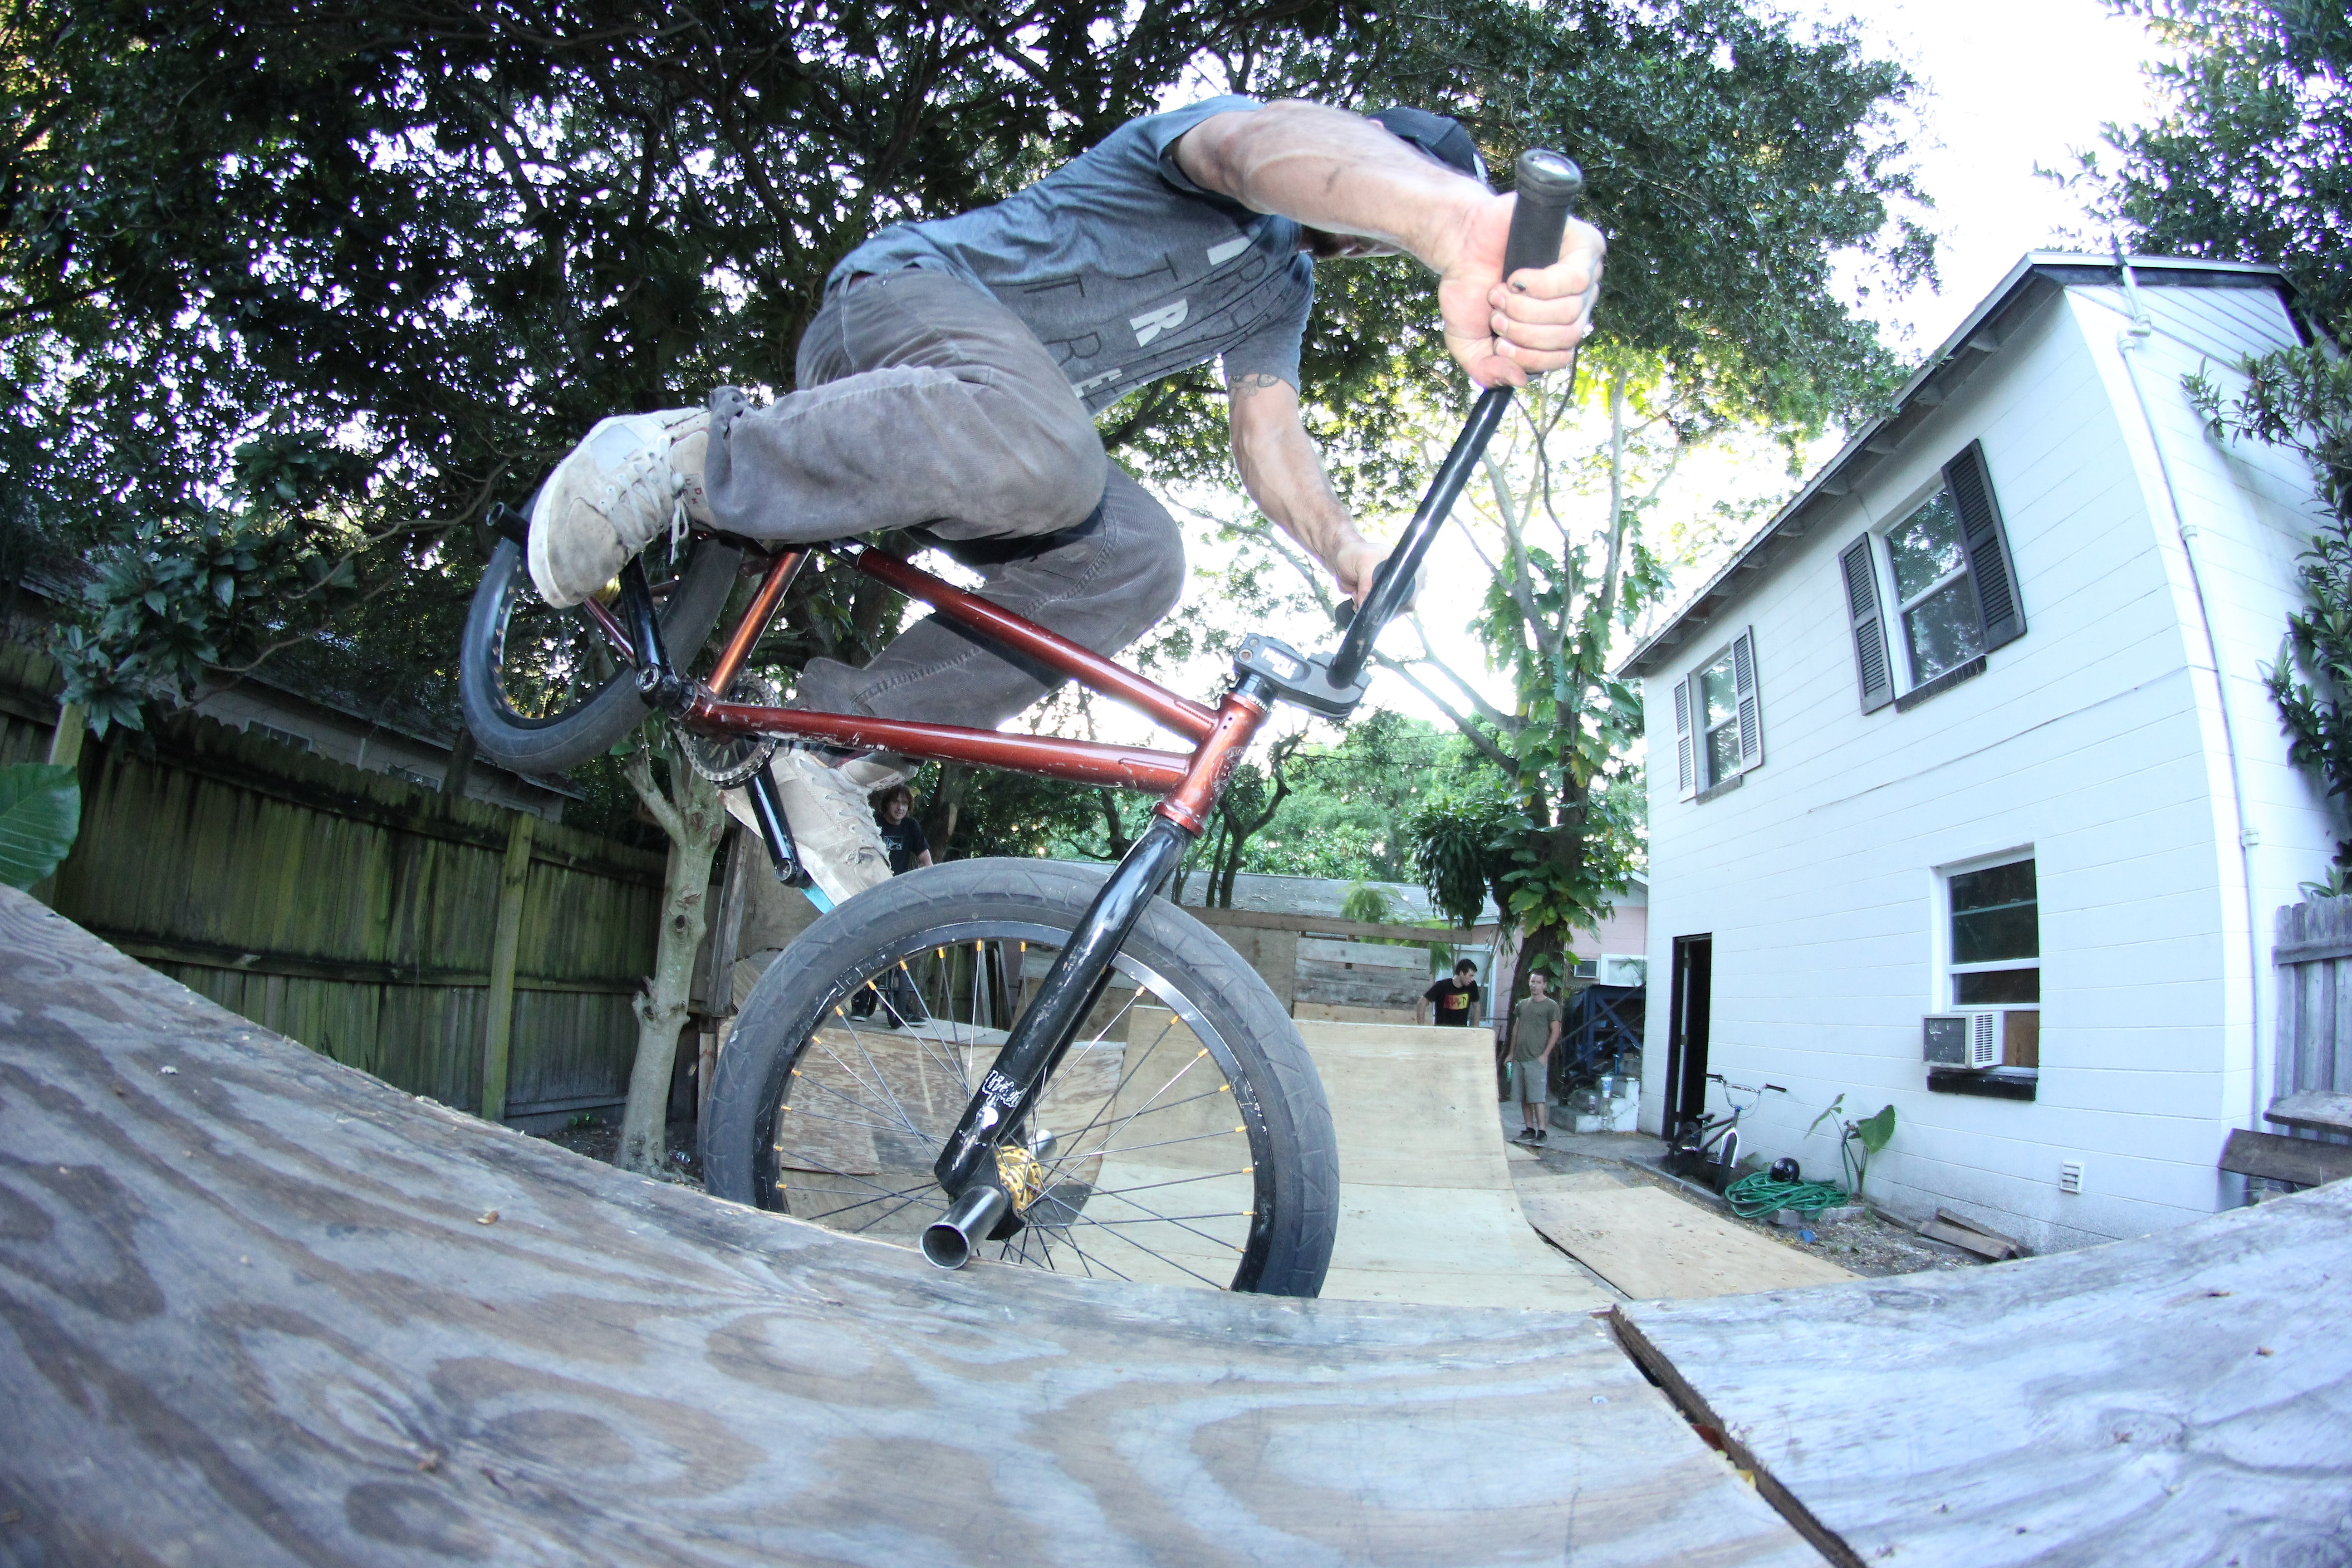 Steve-O. Toothing the quarter with four transitions.